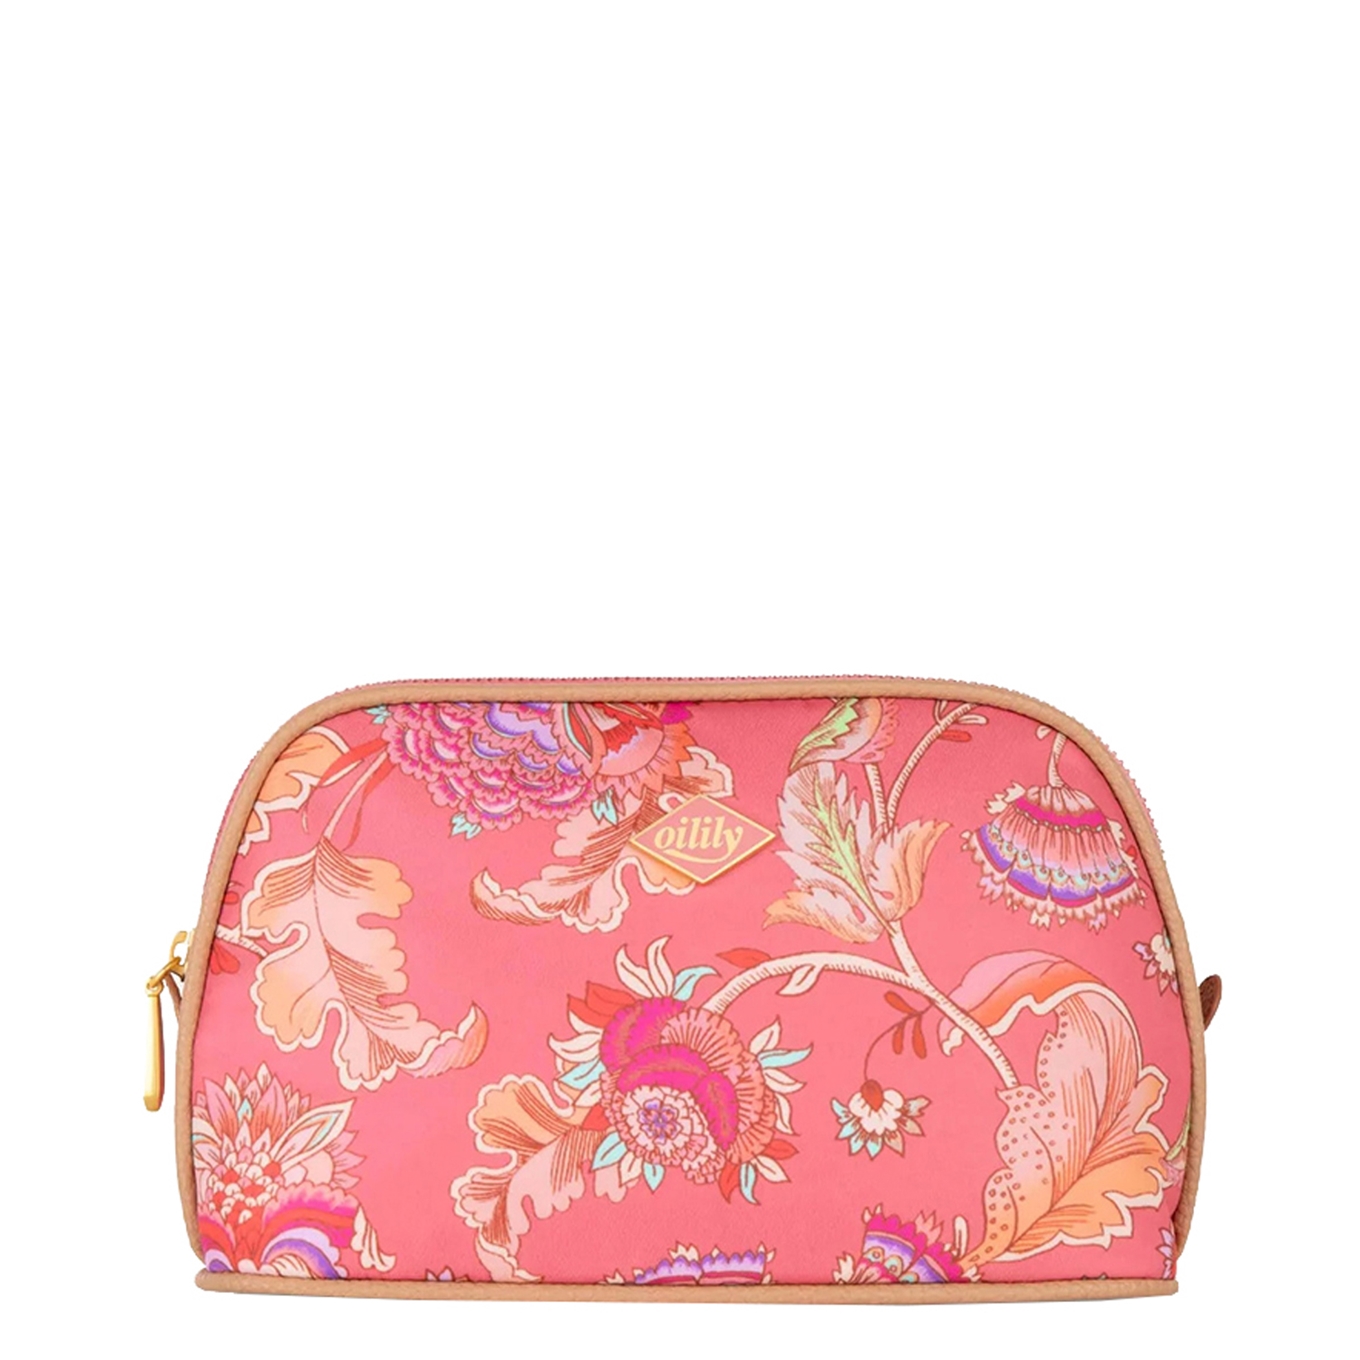 Oilily Colette Cosmetic Bag pink